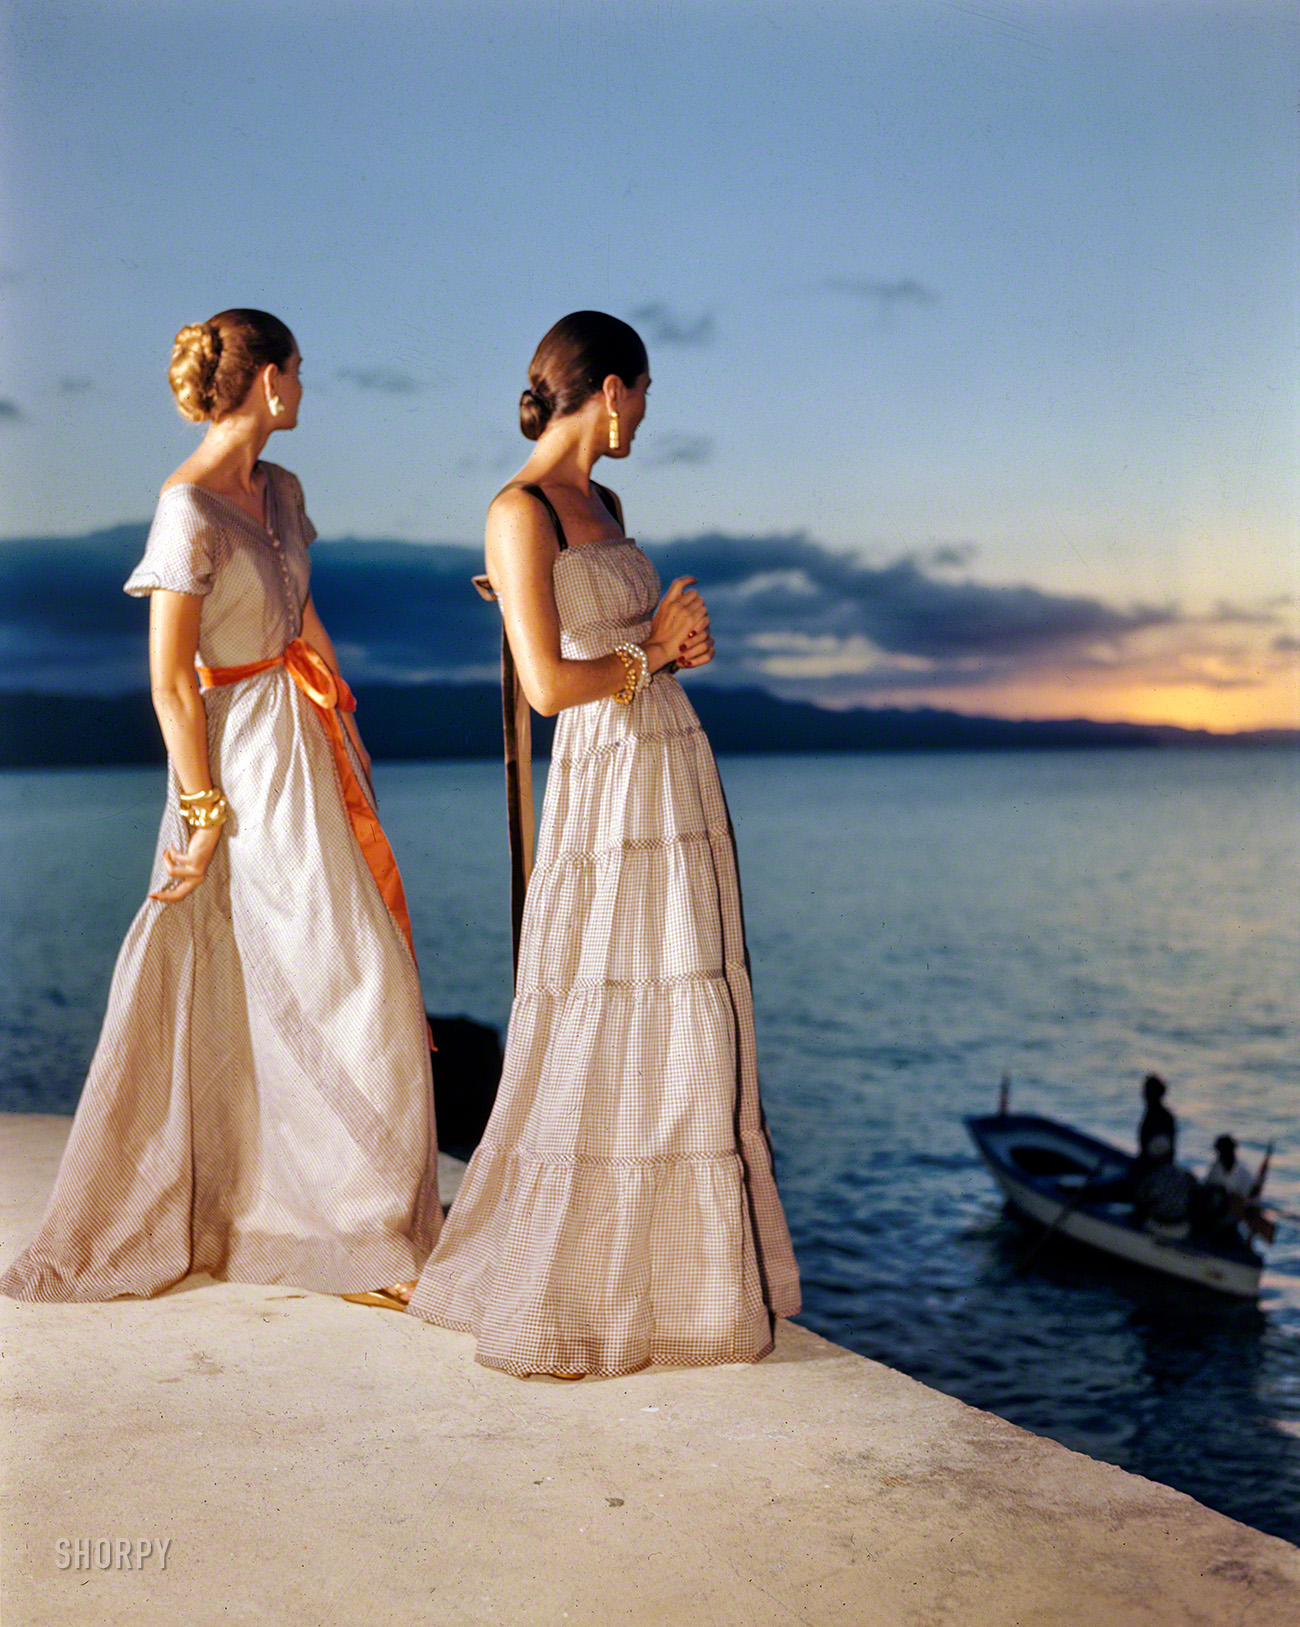 November 1946. "Women in evening gowns on waterfront. San Juan, Puerto Rico." Medium format color transparency by Toni Frissell. View full size.